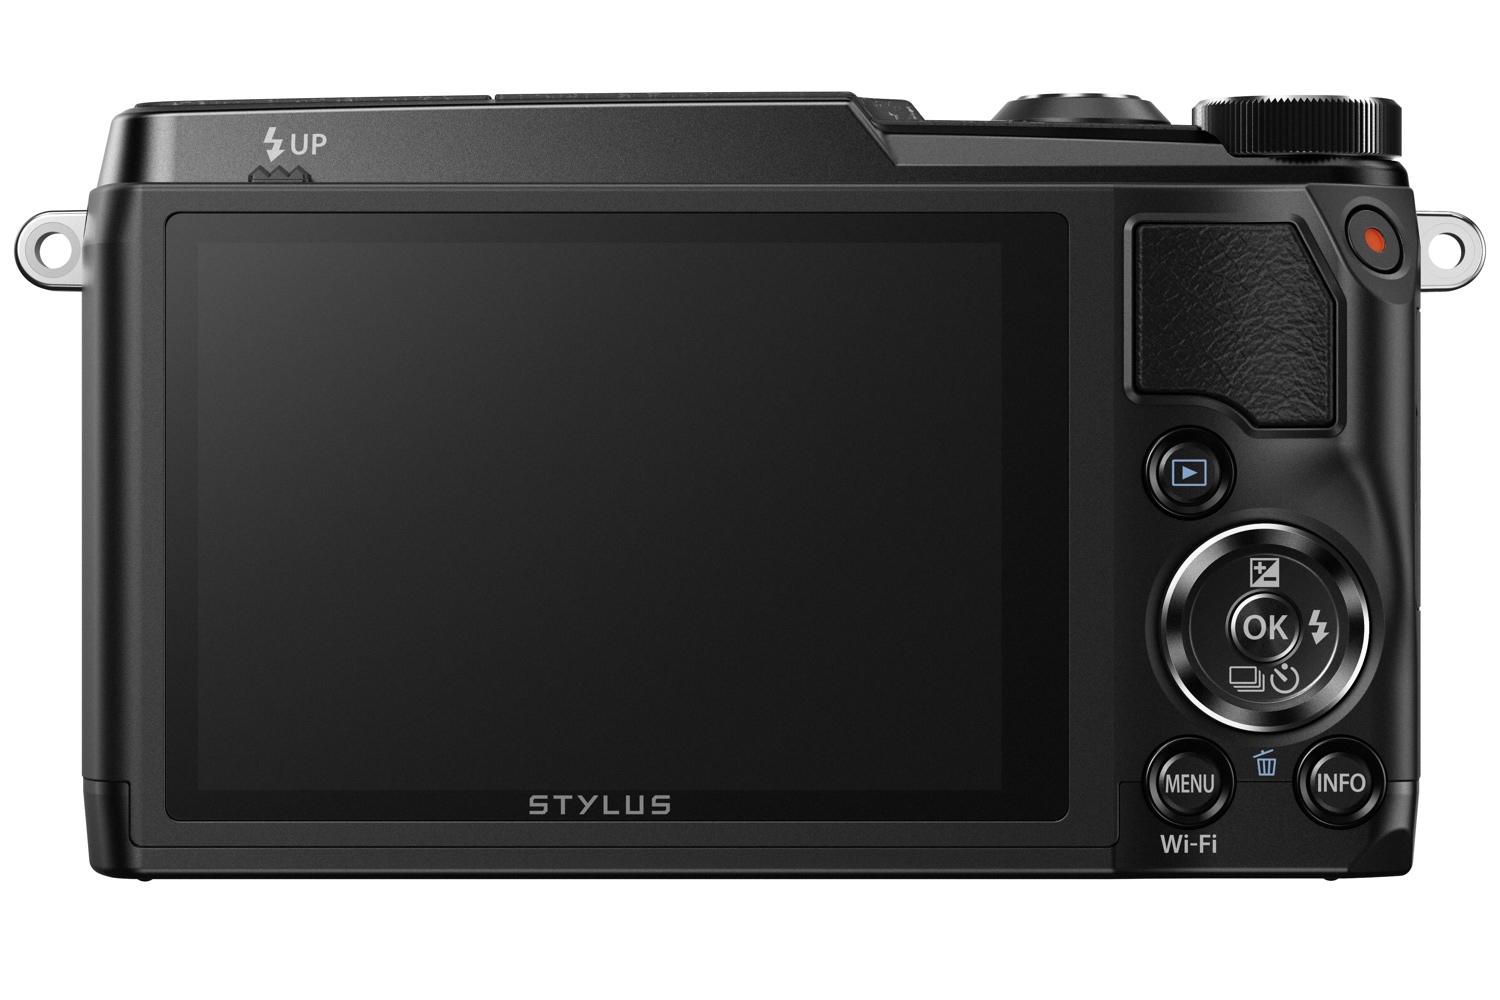 olympus stylus sh 2 compact camera retains 5 axis stabilization adds new night modes sh2